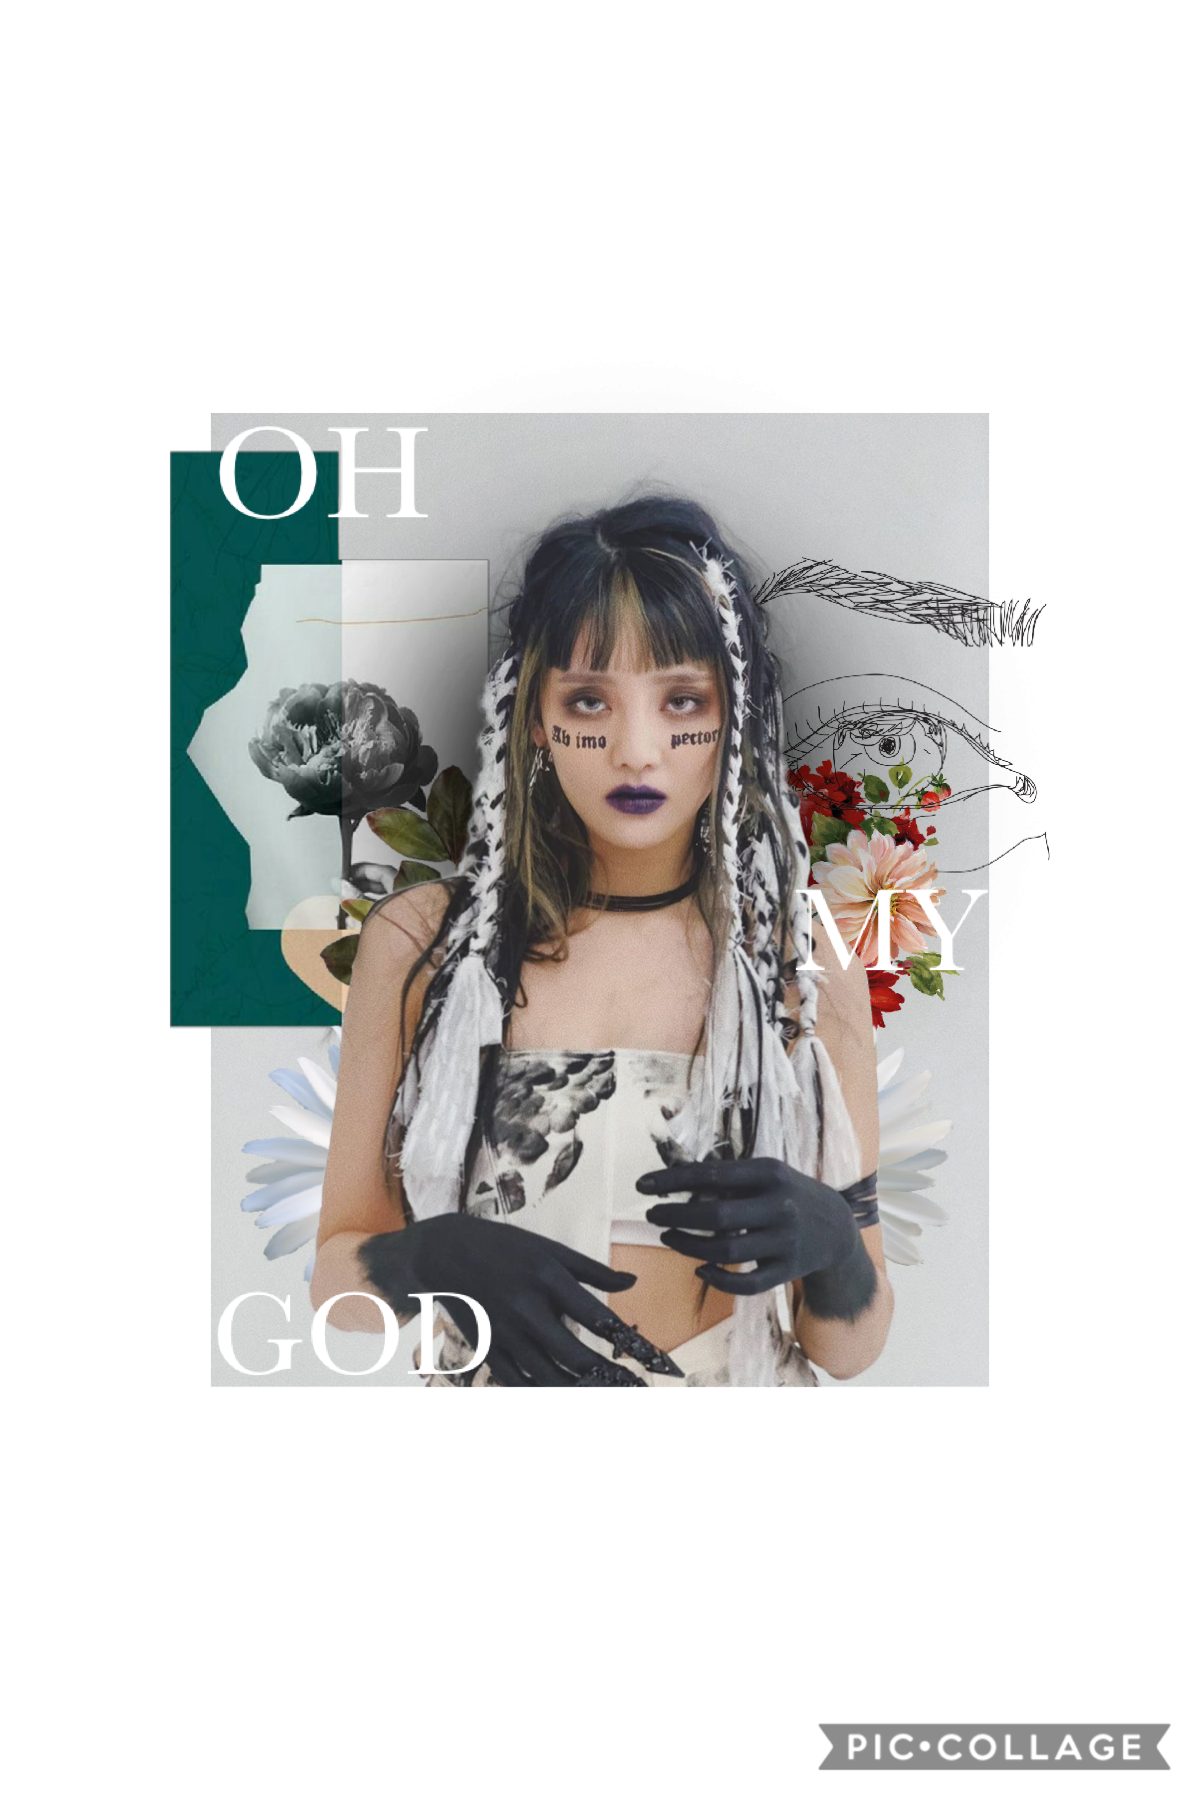 Song: Oh my god by (G)Idle